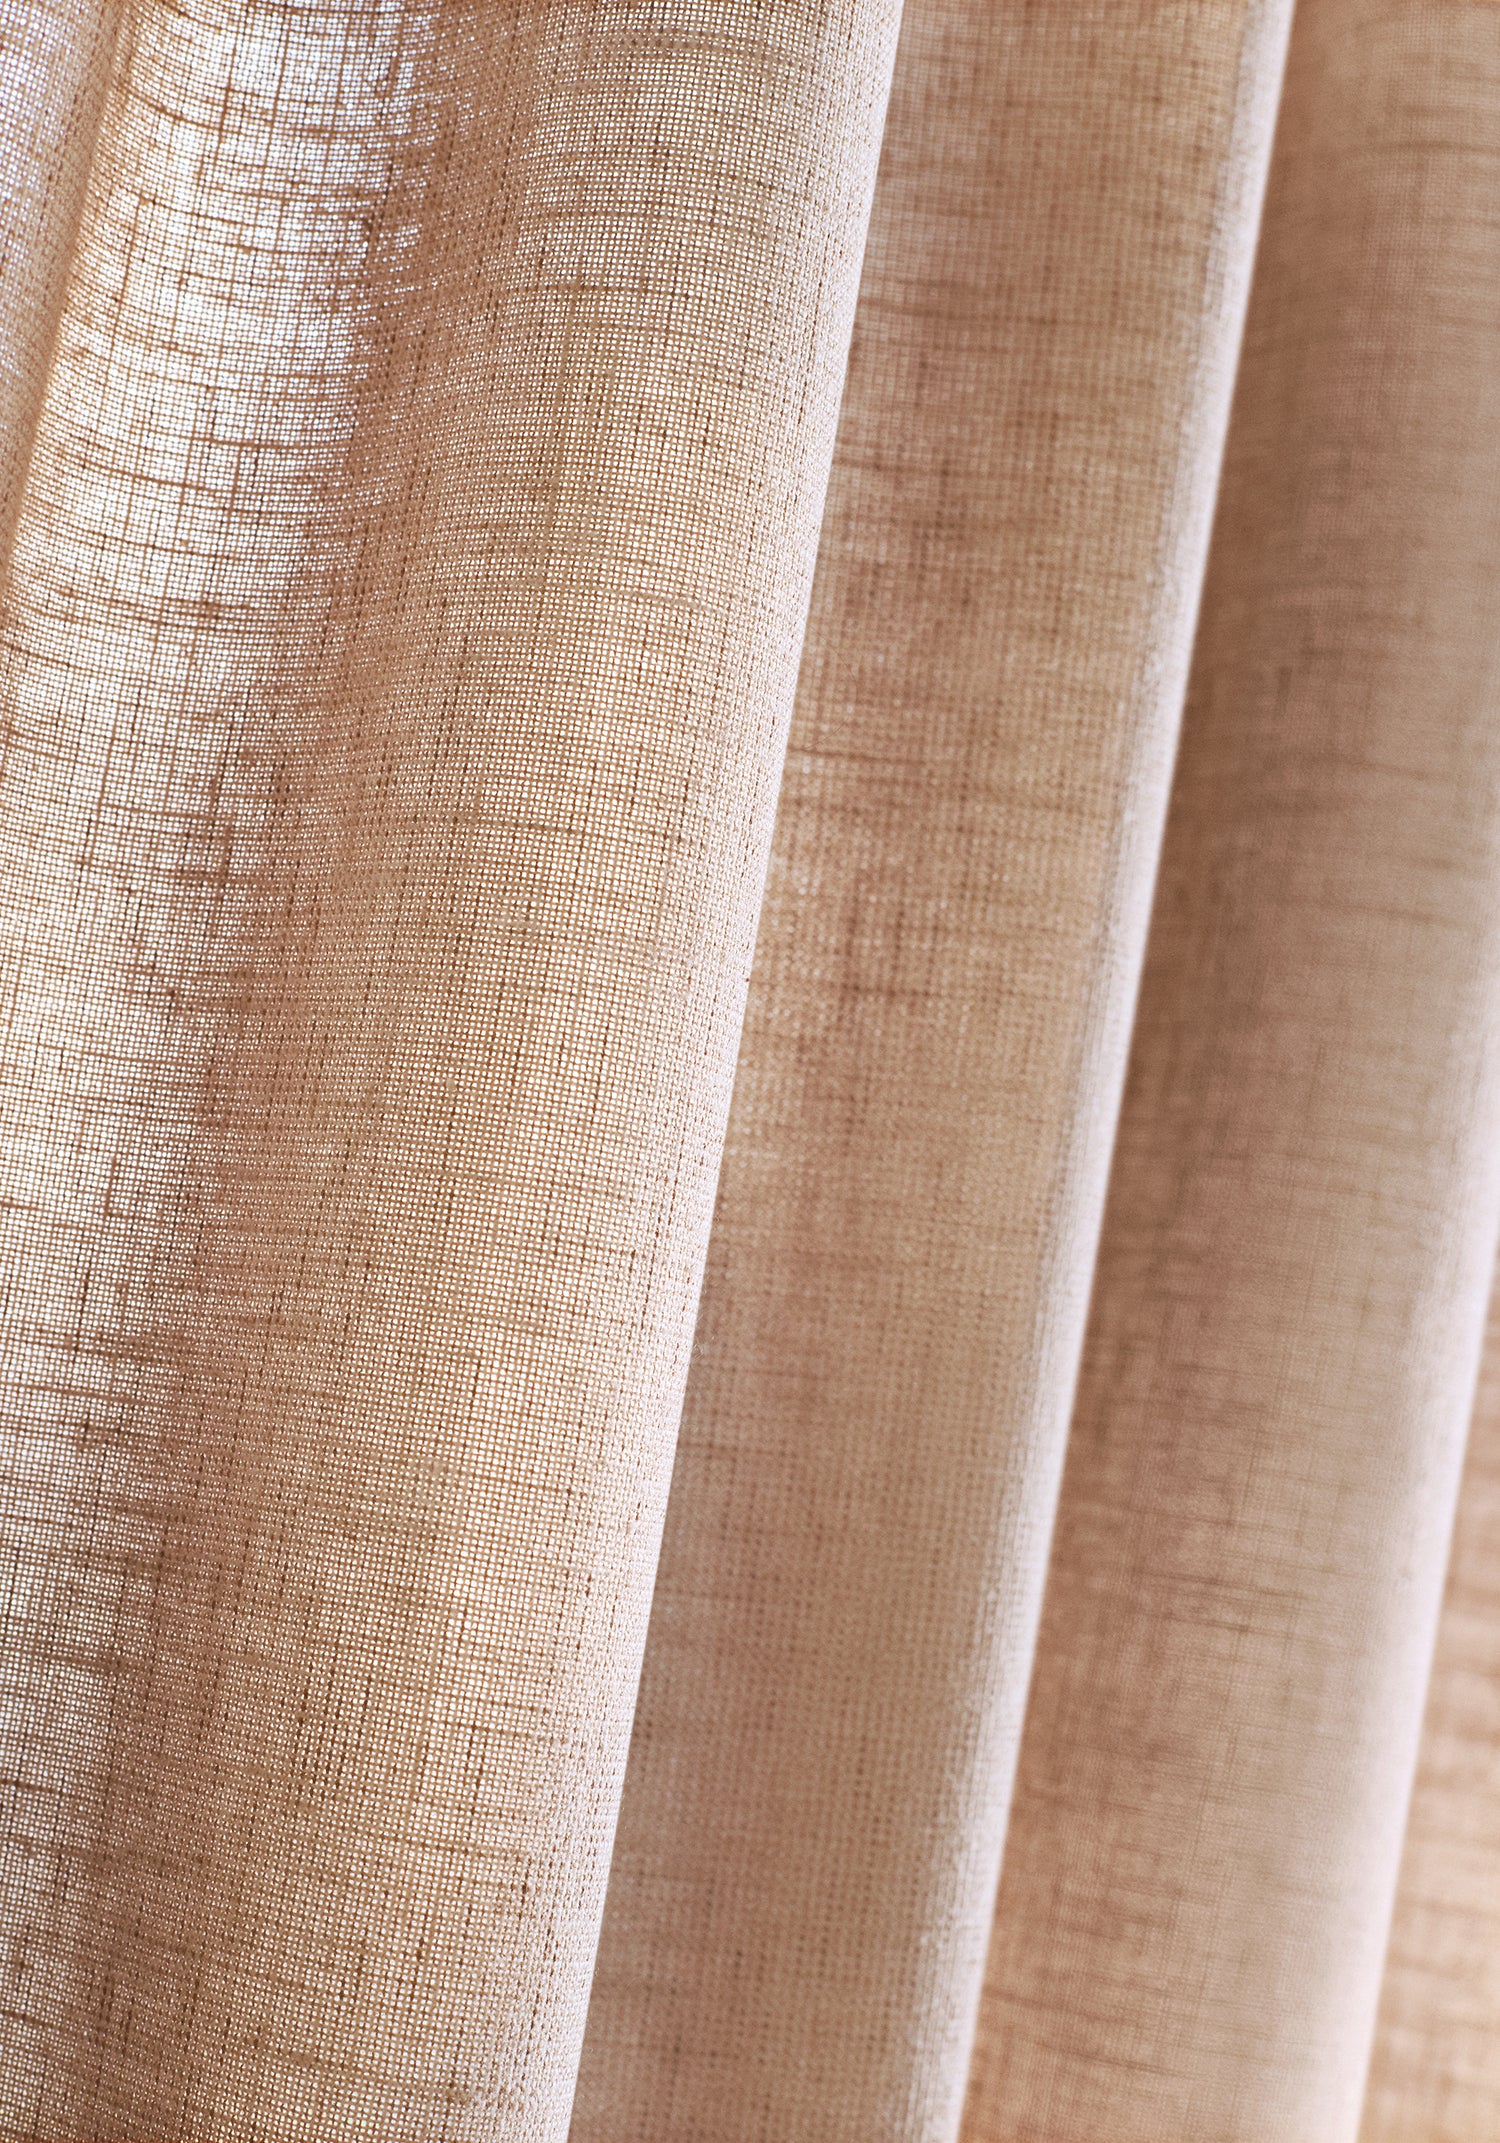 Up close sheer in Ottawa fabric in clay color - pattern number FWW8252 - by Thibaut in the Aura collection